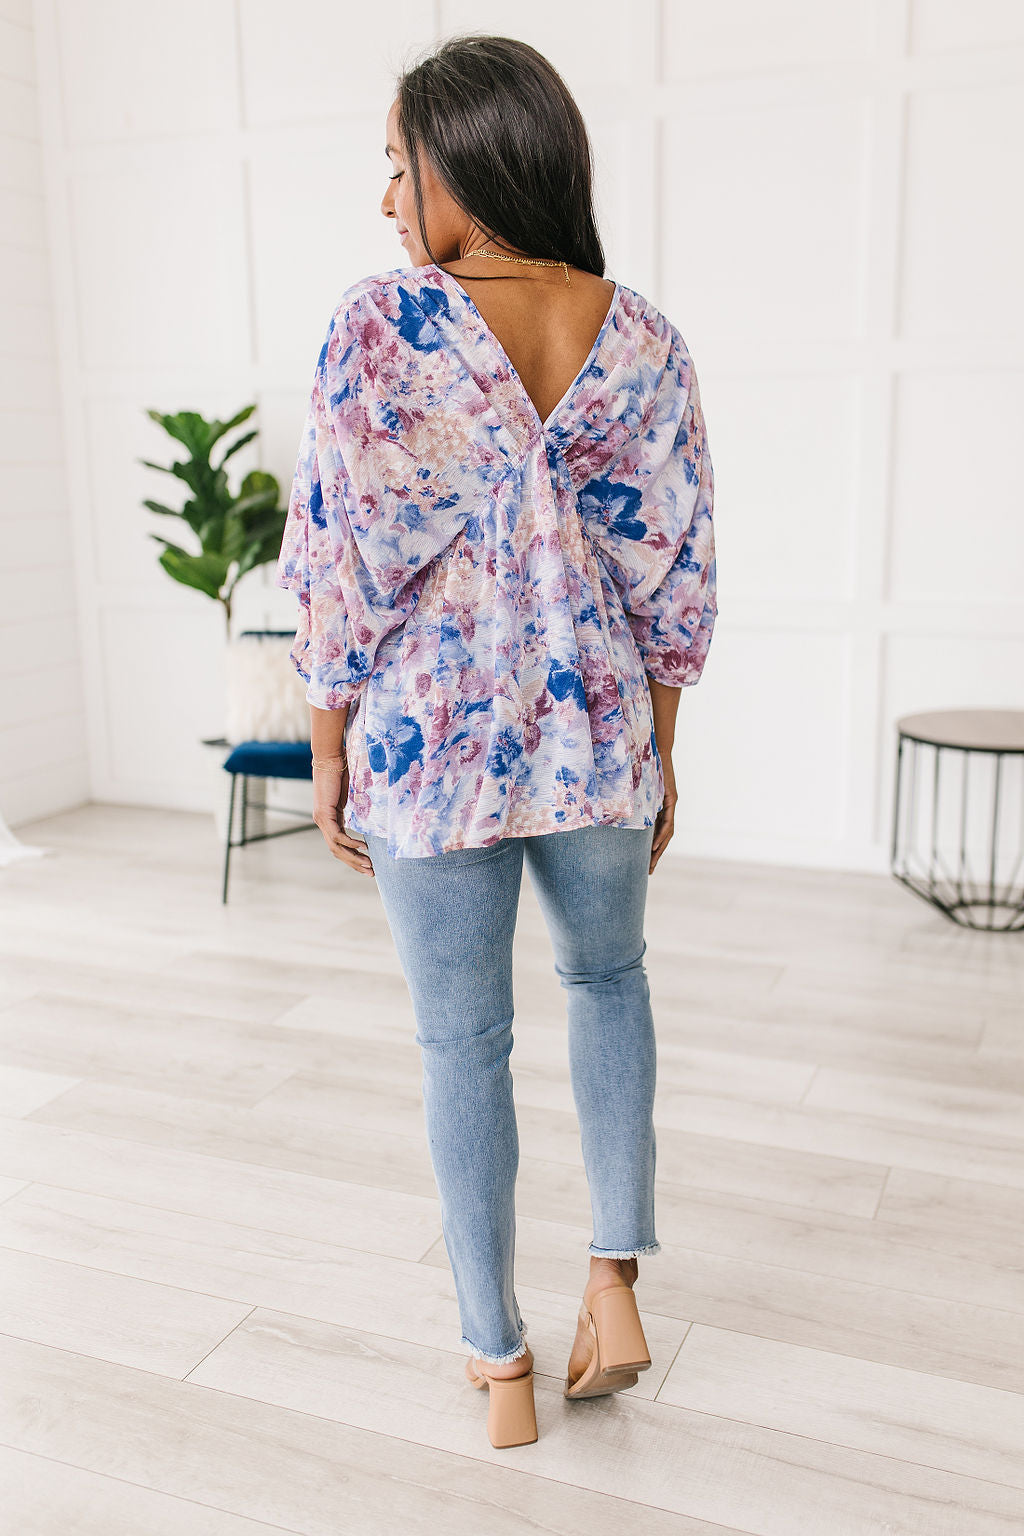 Floral Fable Blue Dolman Sleeve Draped Tunic Top